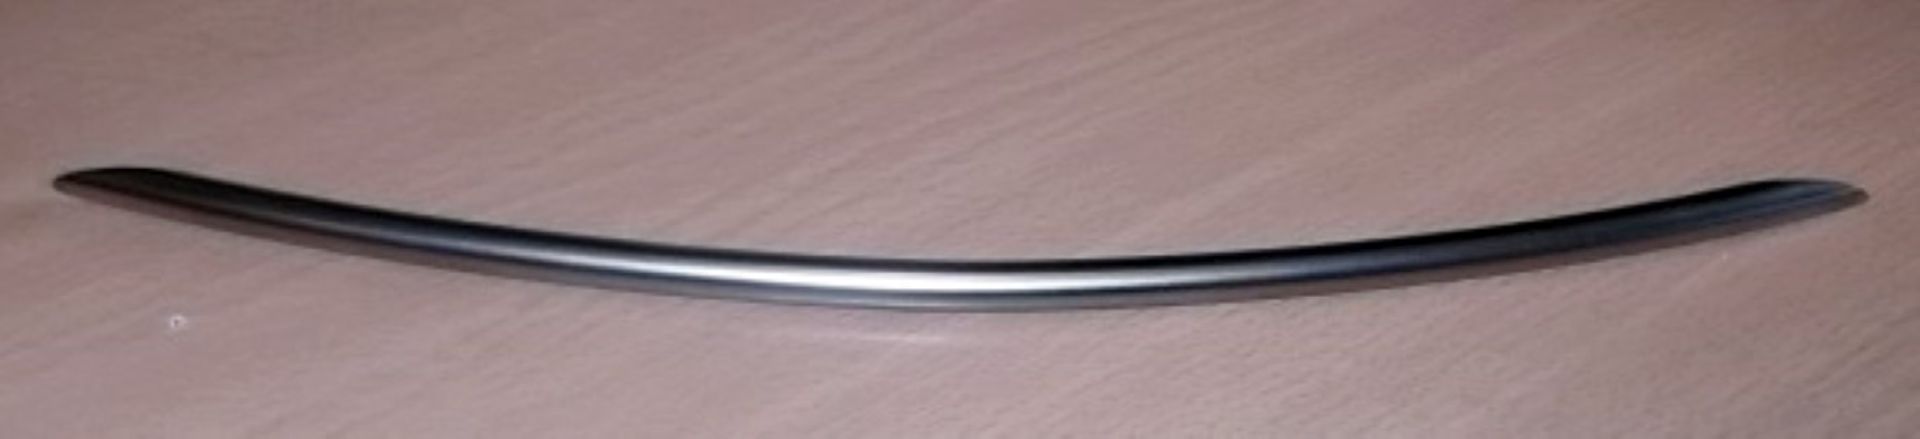 400 x BOW Handle Kitchen Door Handles By Crestwood - 320mm - New Stock - Brushed Nickel Finish - - Image 7 of 8